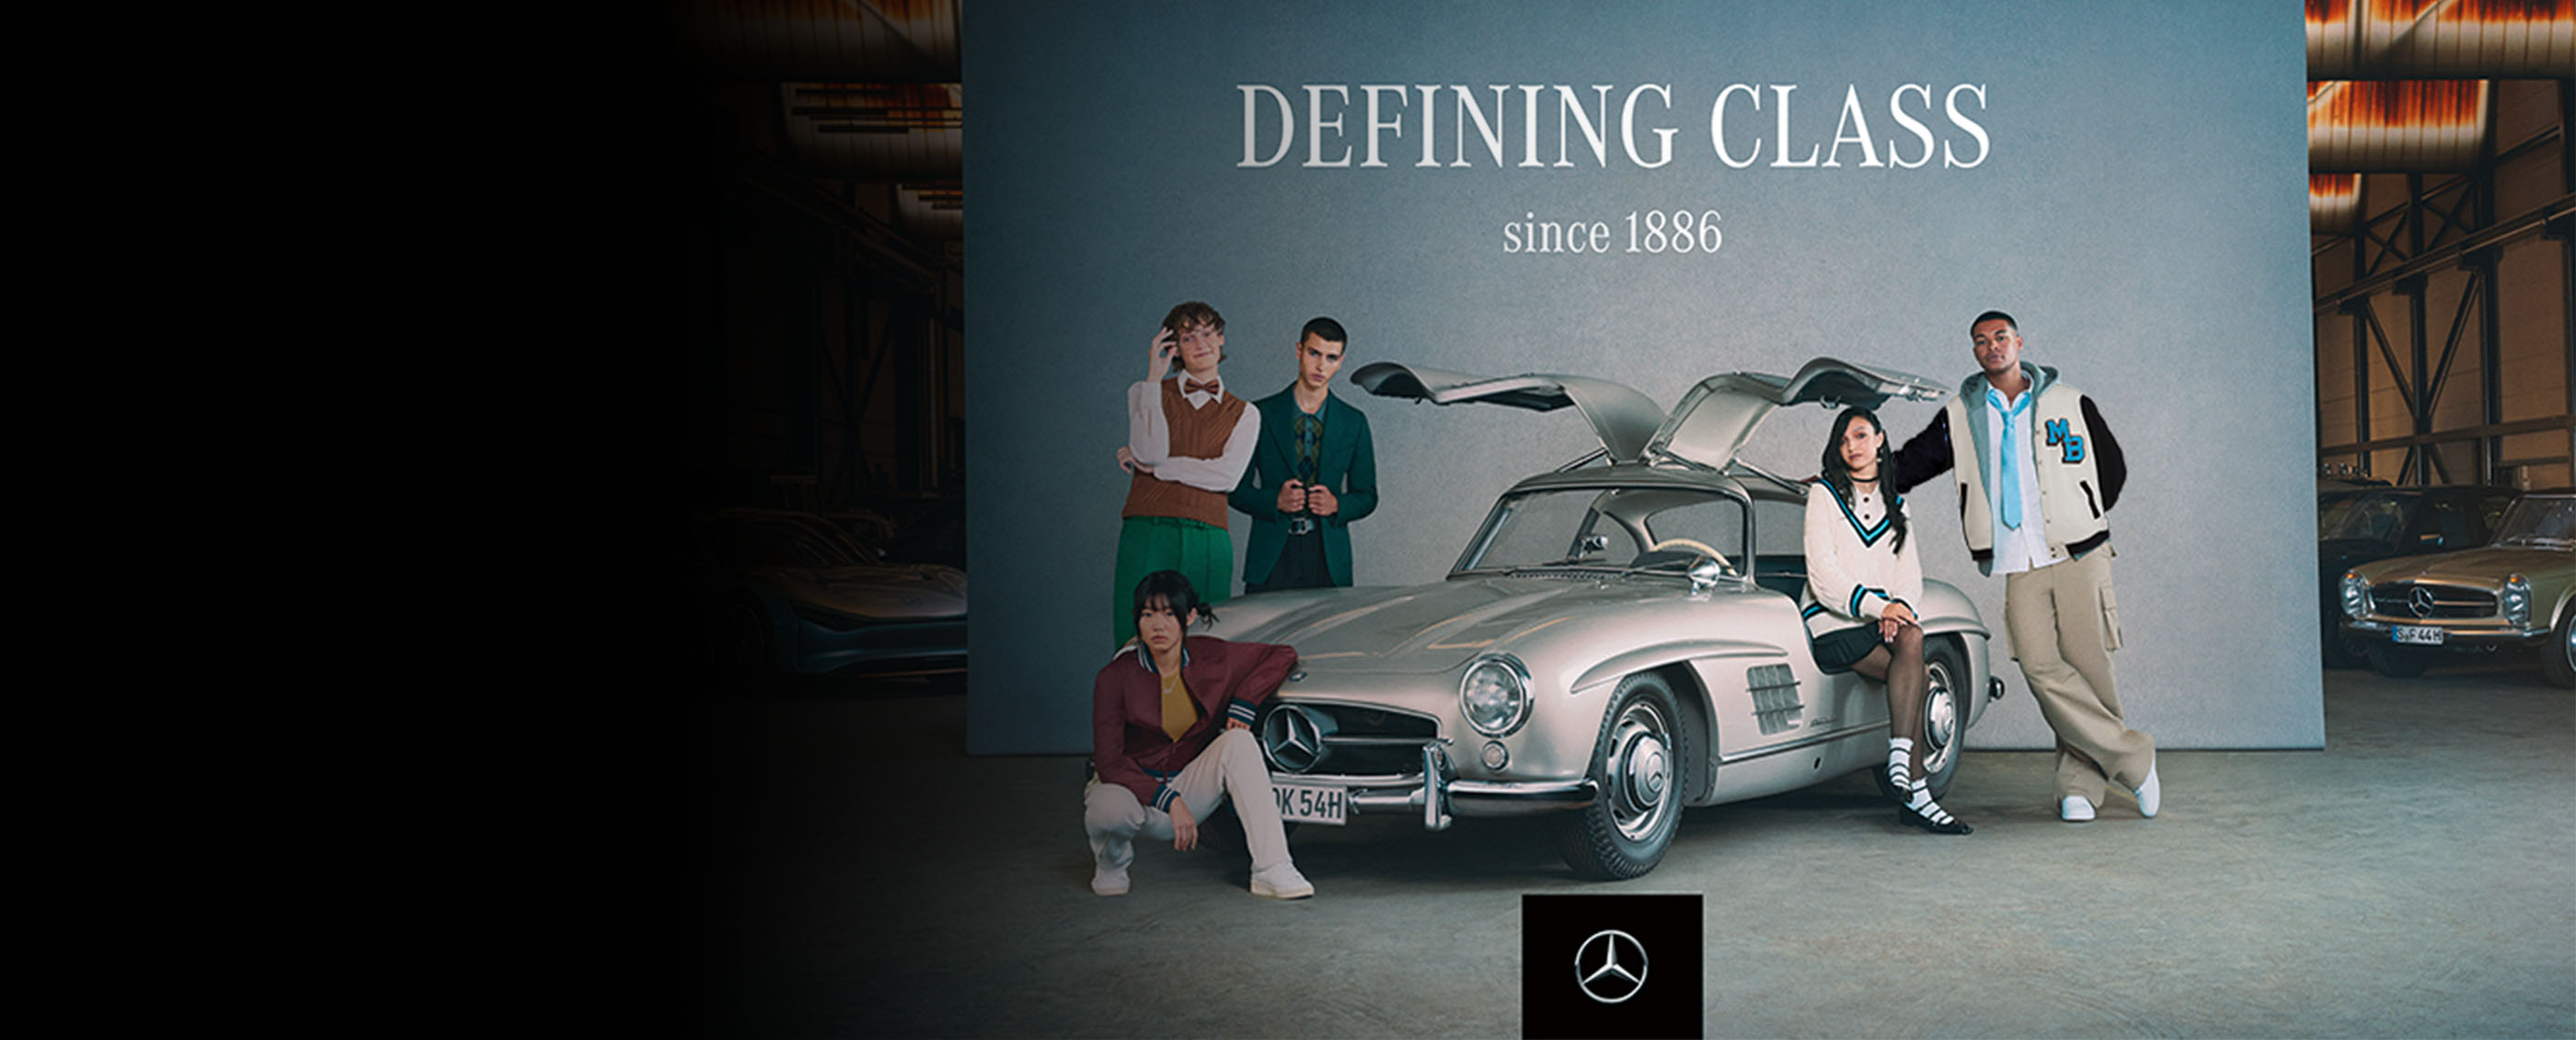 Mercedes-Benz on X: Enjoy a relaxed weekend trip in your Mercedes-Benz and  with the stylish Mercedes-Benz classic leather bag. Get the item now and  get started!  #MBclassic #MercedesBenz #shopping #bag   /